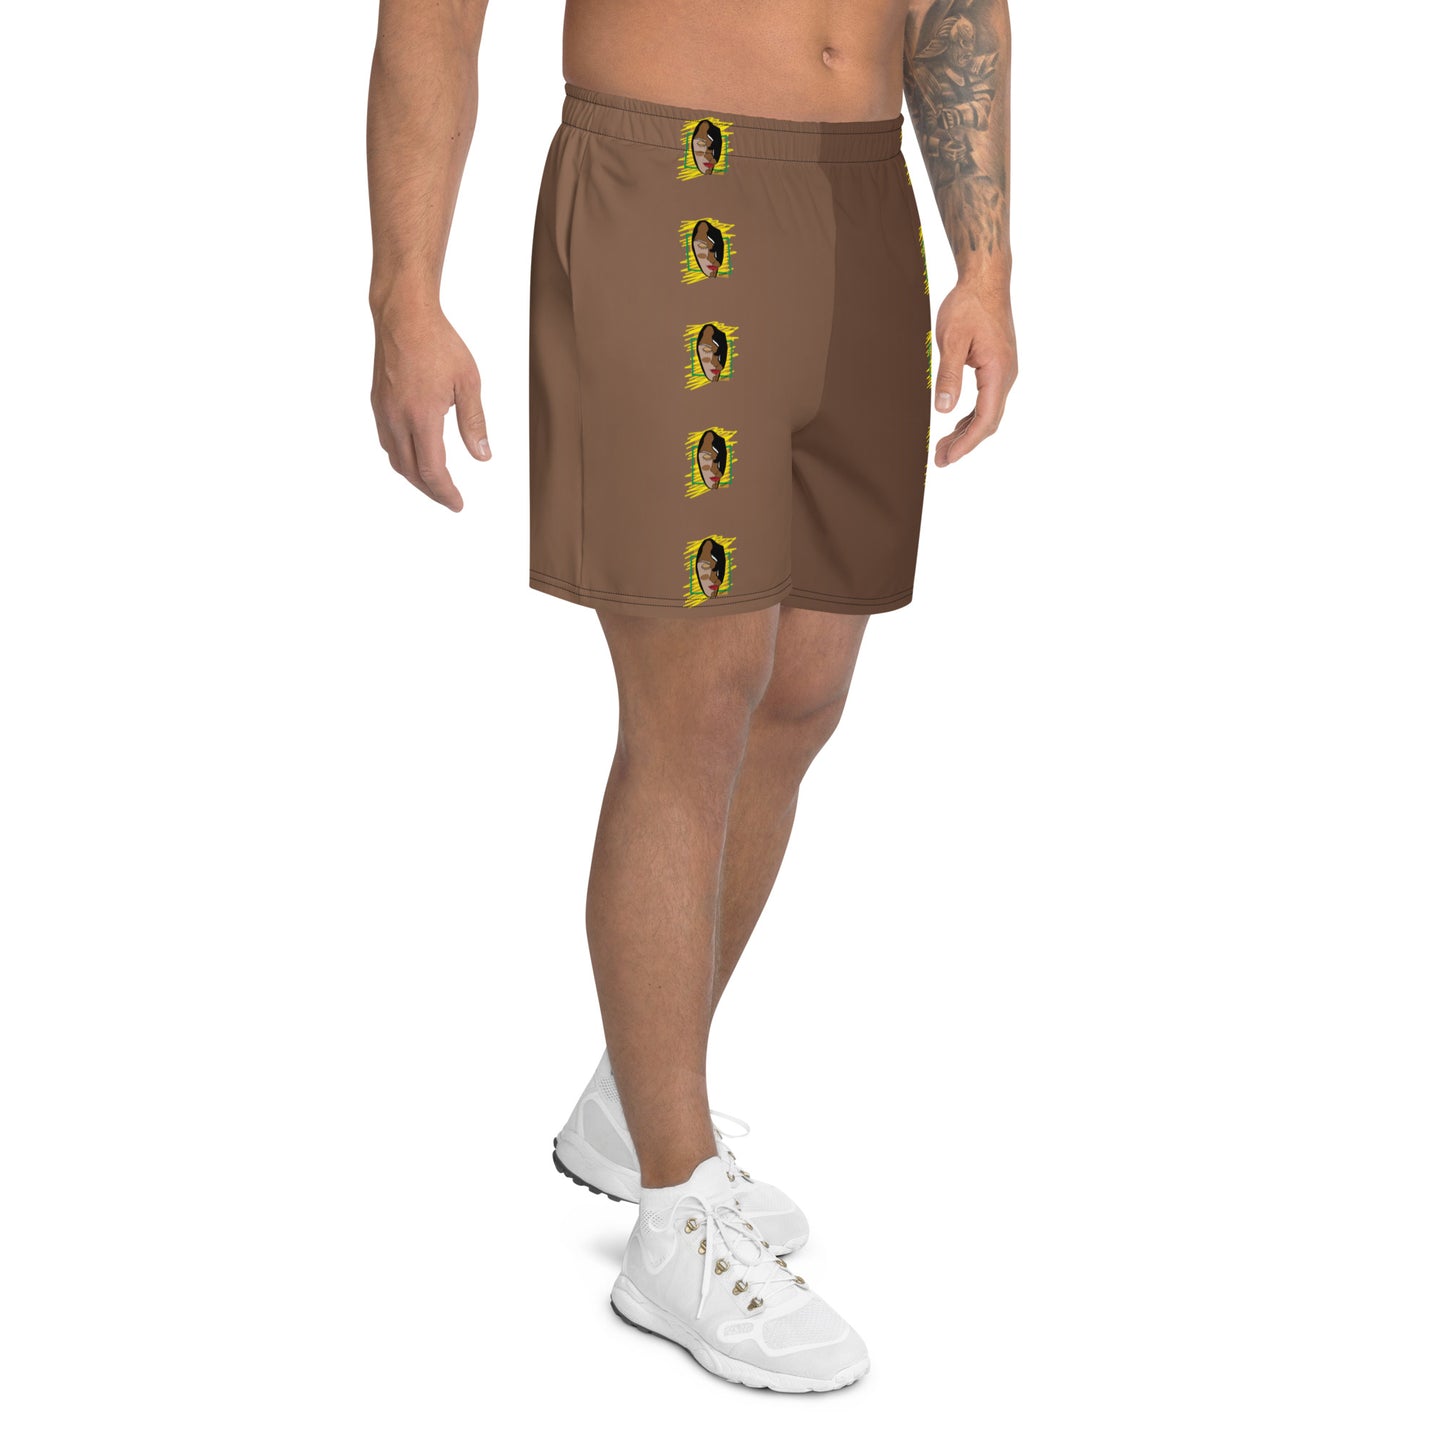 Heritage Print Nude Men's Athletic Long Shorts